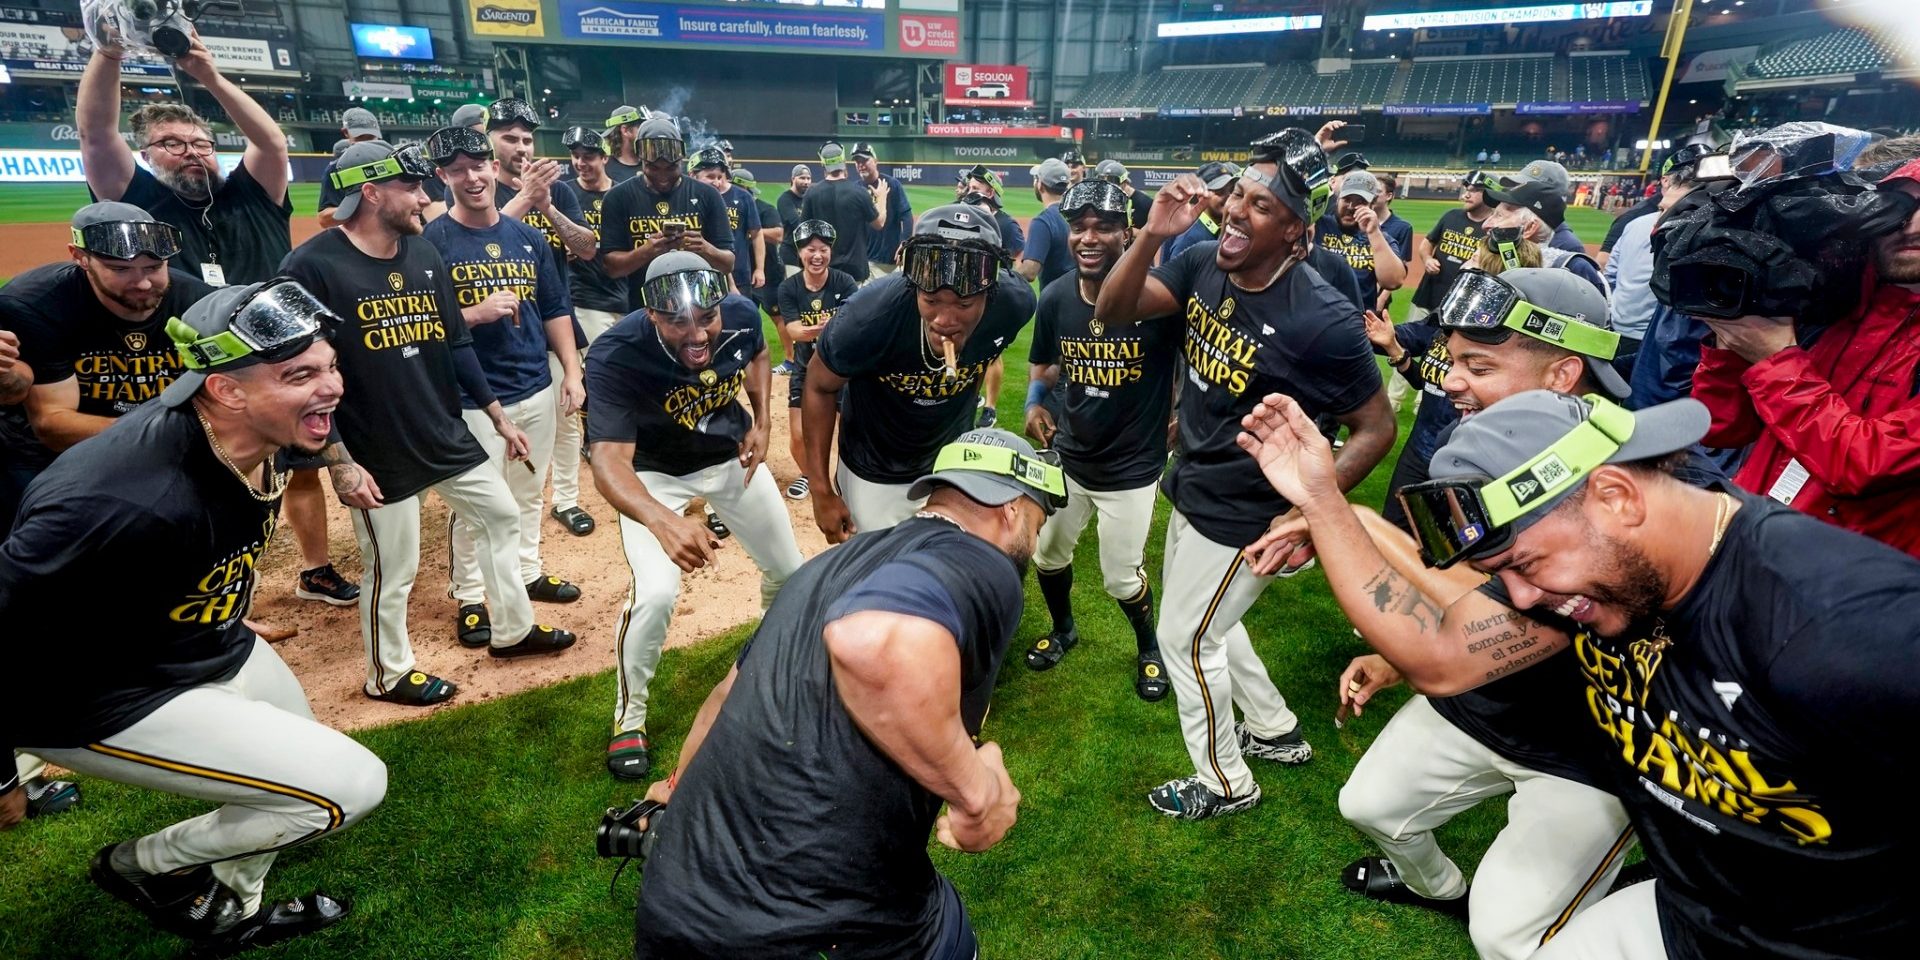 Brewers celebrate 3rd NL Central title in 6 seasons despite loss to Cardinals